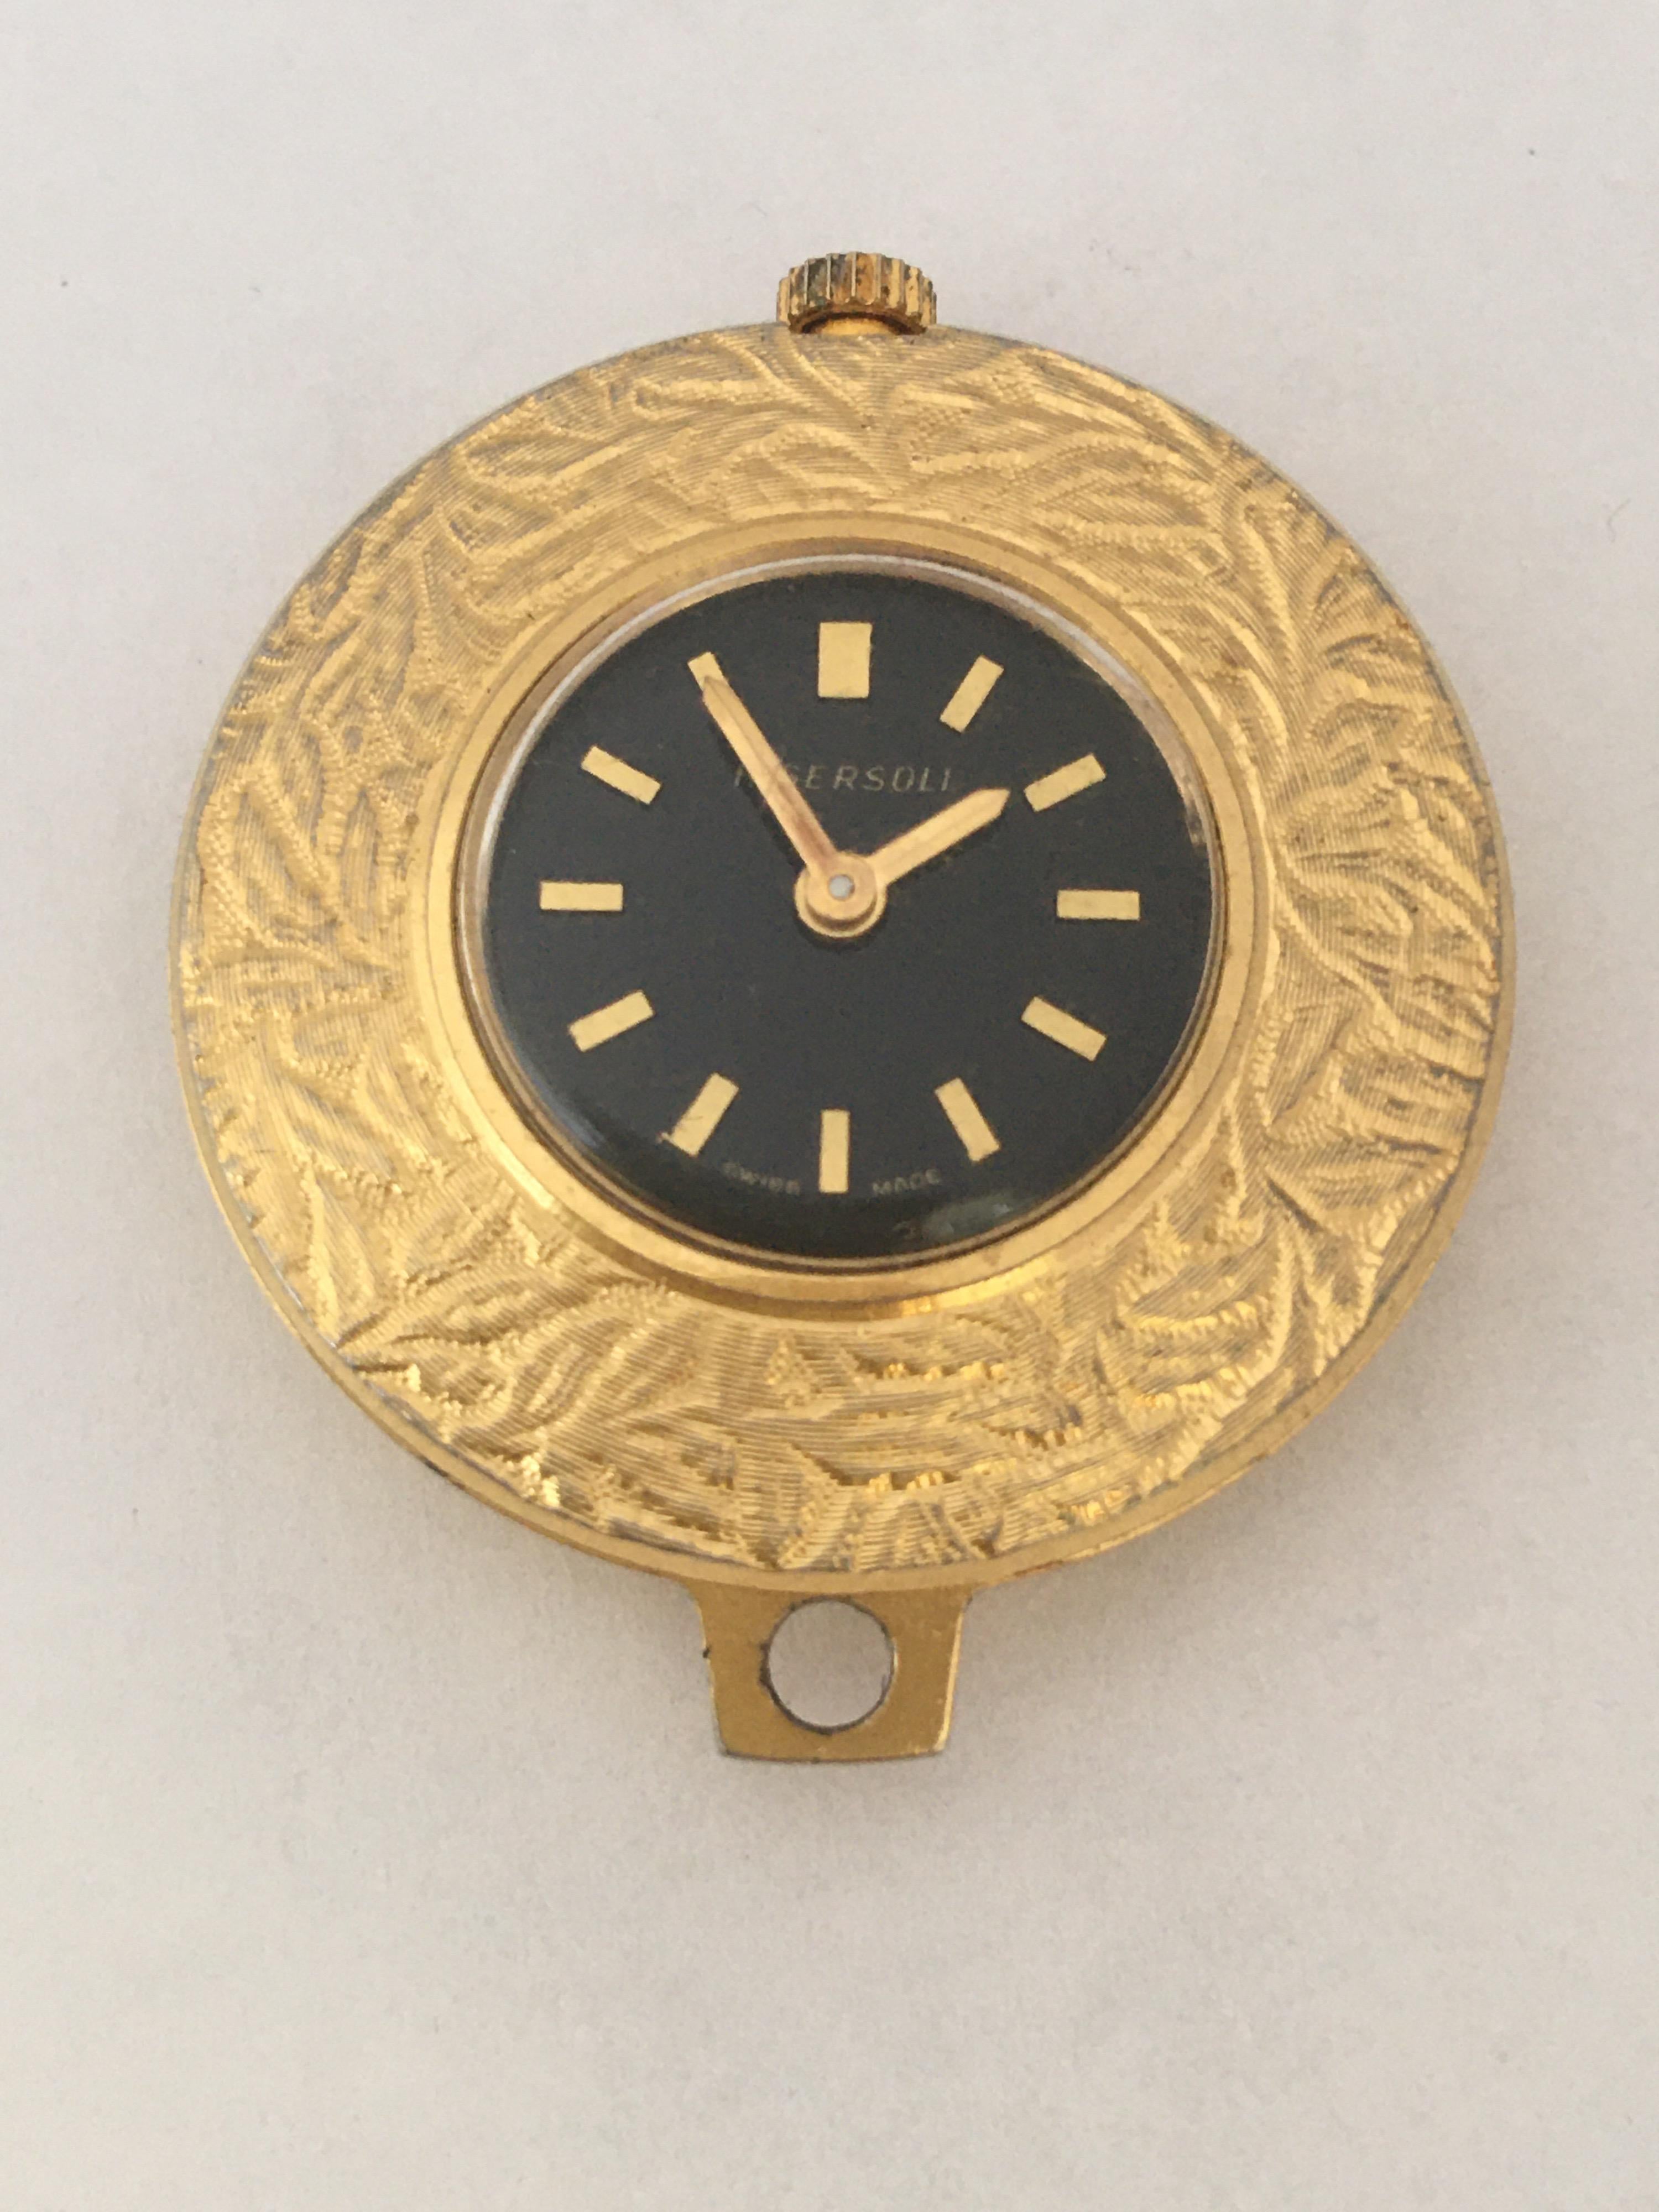 Vintage Gold-Plated Ingersoll Manual Winding Pendant Watch 3